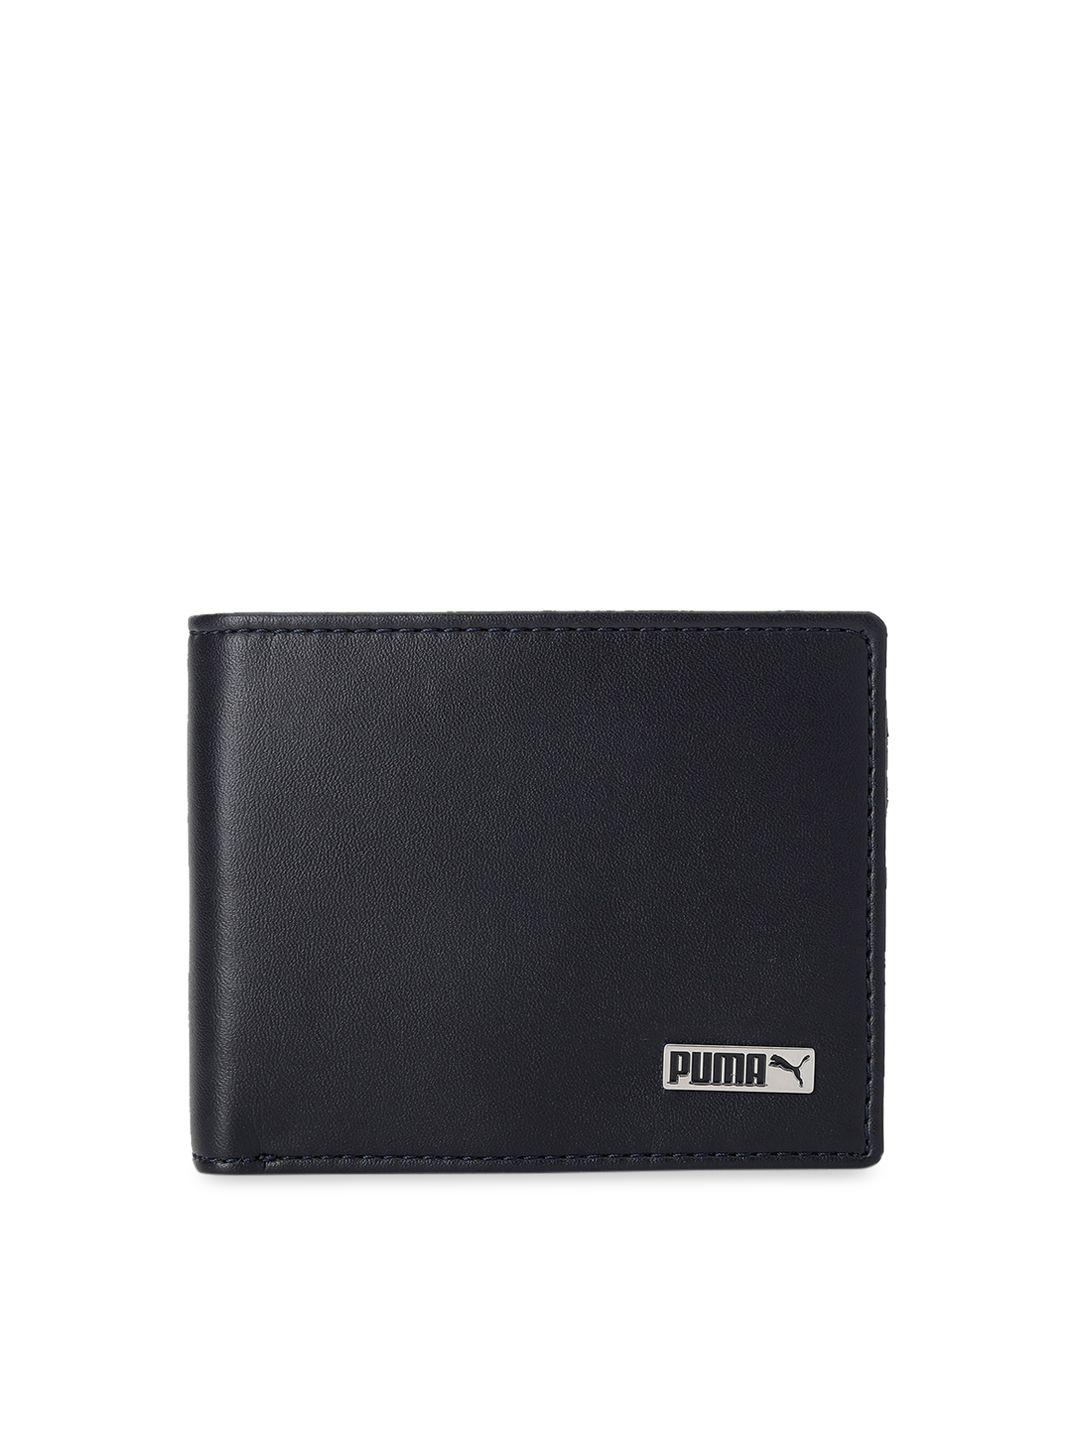 puma unisex navy blue solid two fold wallet